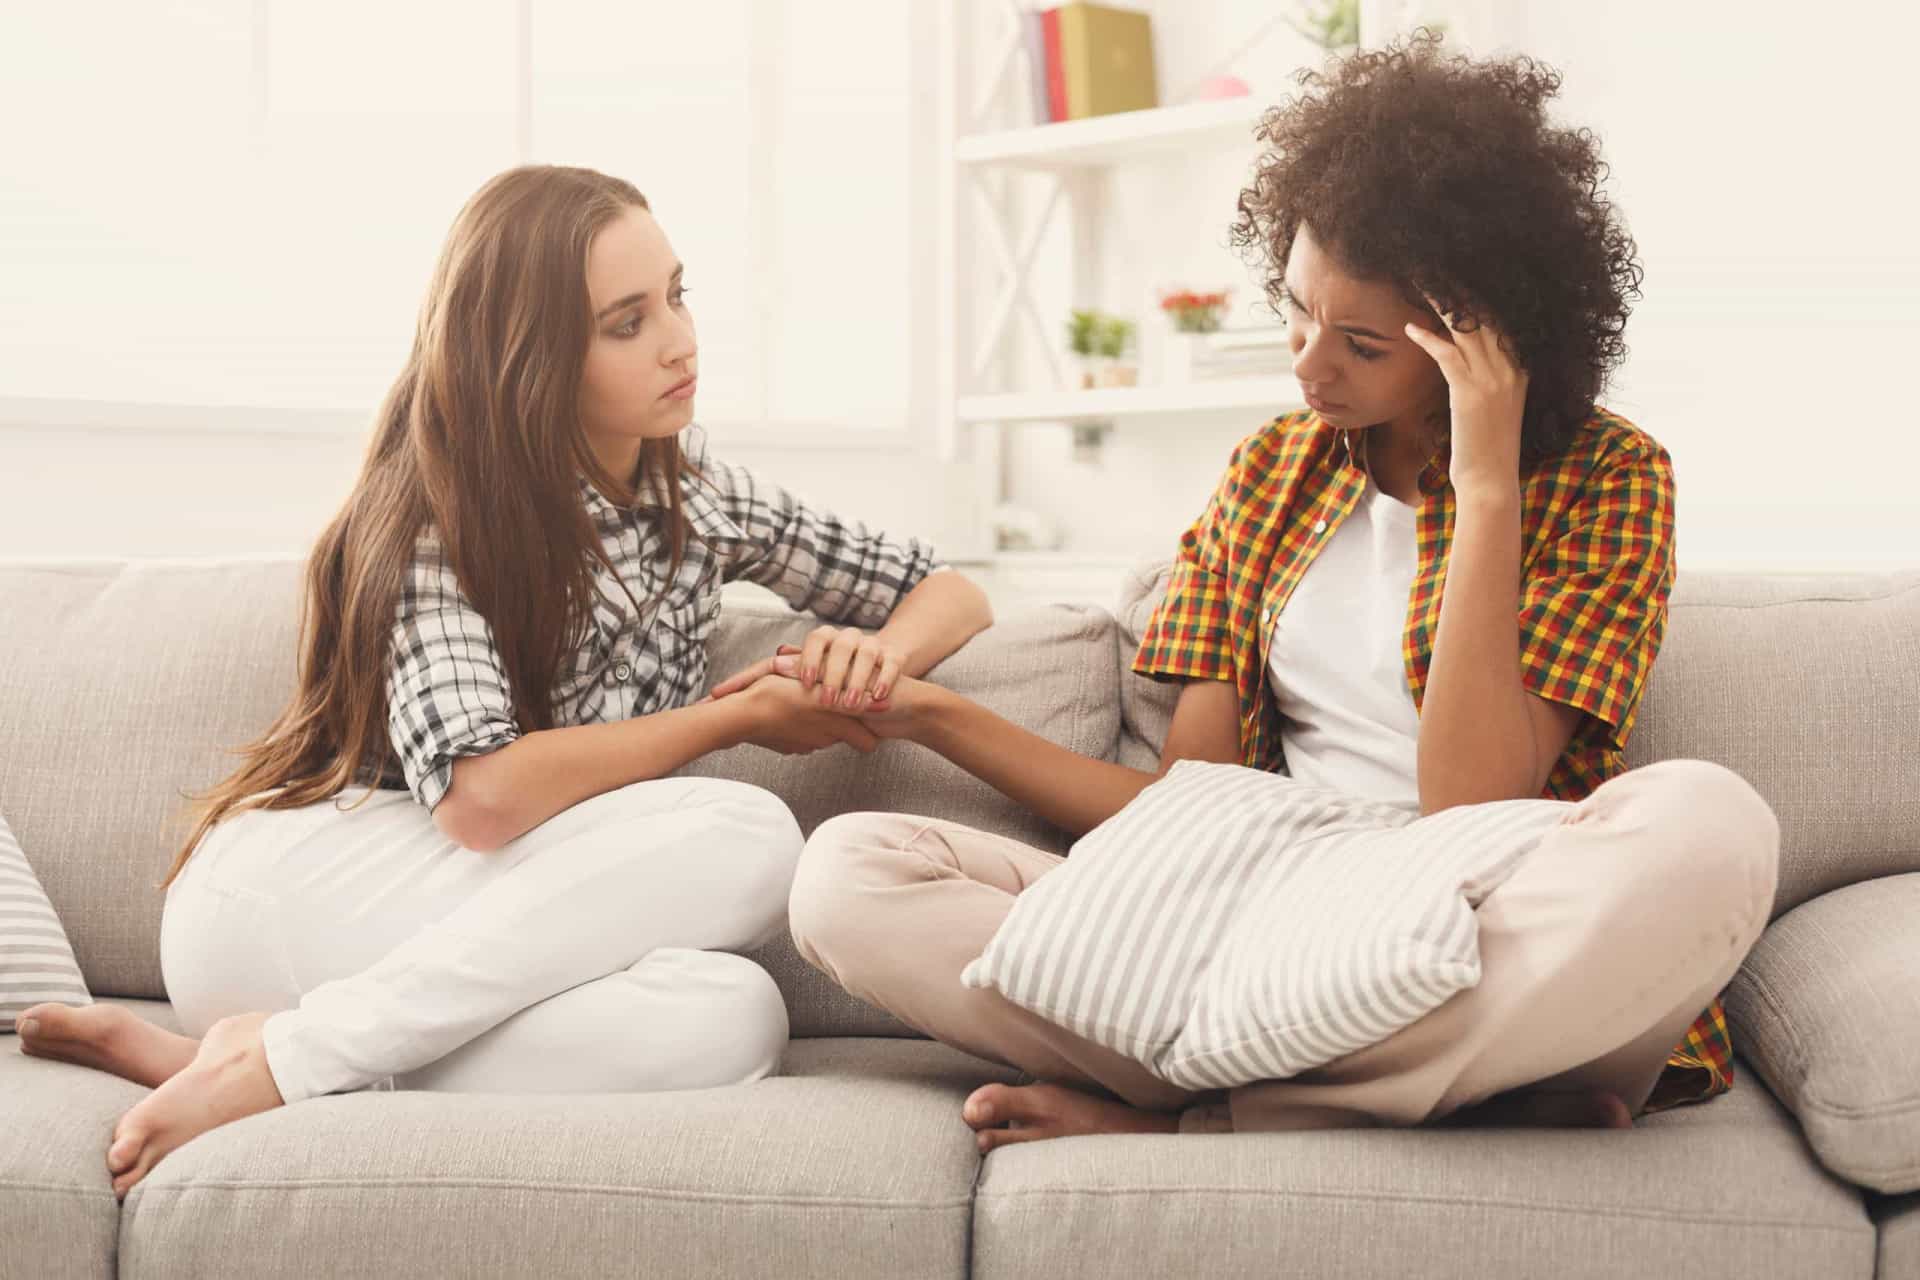 <p>It is essential to not only admit your addiction to yourself, but to someone you trust as well, be it a friend or a family member. Chances are they've already noticed signs of substance abuse in your behavior, and will be relieved to hear that you've become aware of it and are ready to make some changes.</p><p>You may also like: <a href="https://www.starsinsider.com/n/267781?utm_source=msn.com&utm_medium=display&utm_campaign=referral_description&utm_content=513601en-en">All the times the British royal family turned up in unexpected places</a></p>